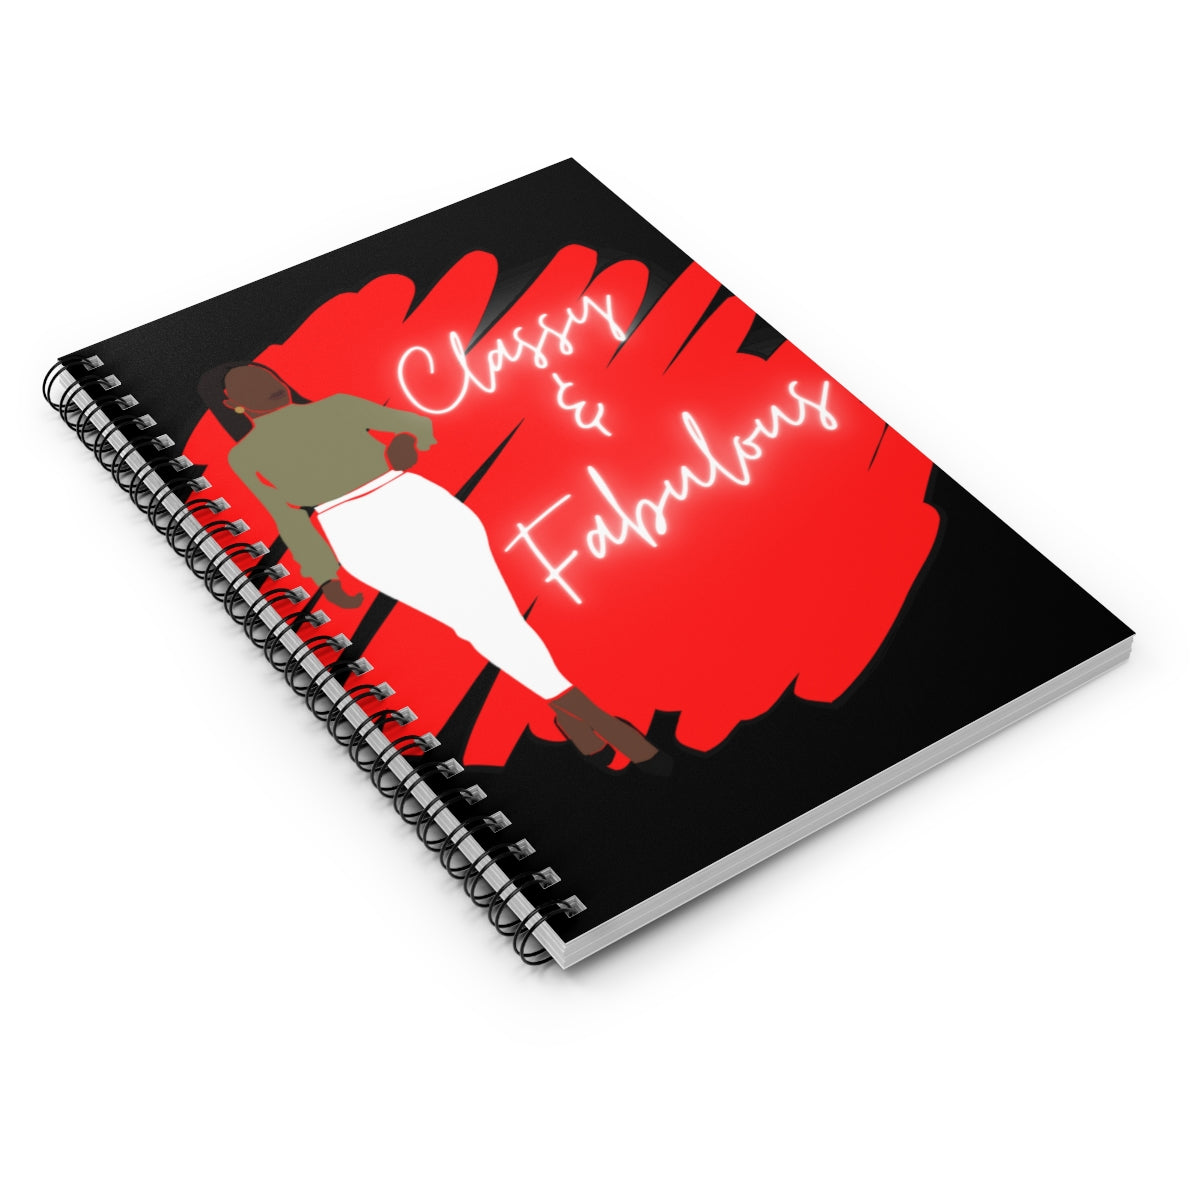 Classy & Fabulous Spiral Notebook - Ruled Line